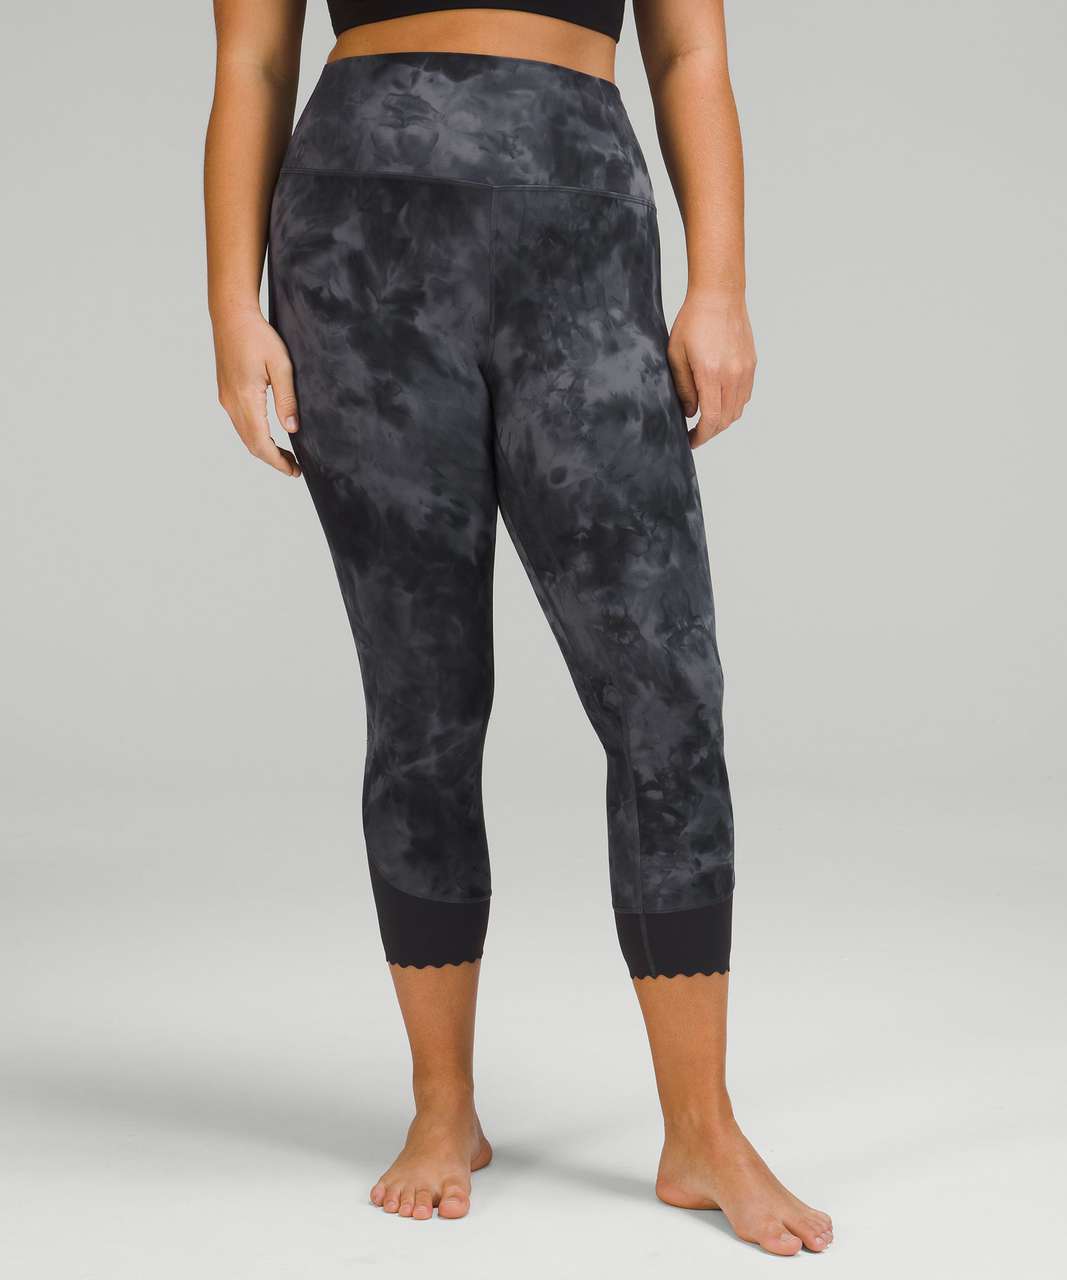 These leggings are the diamond dye pitch grey graphic grey in size 2.